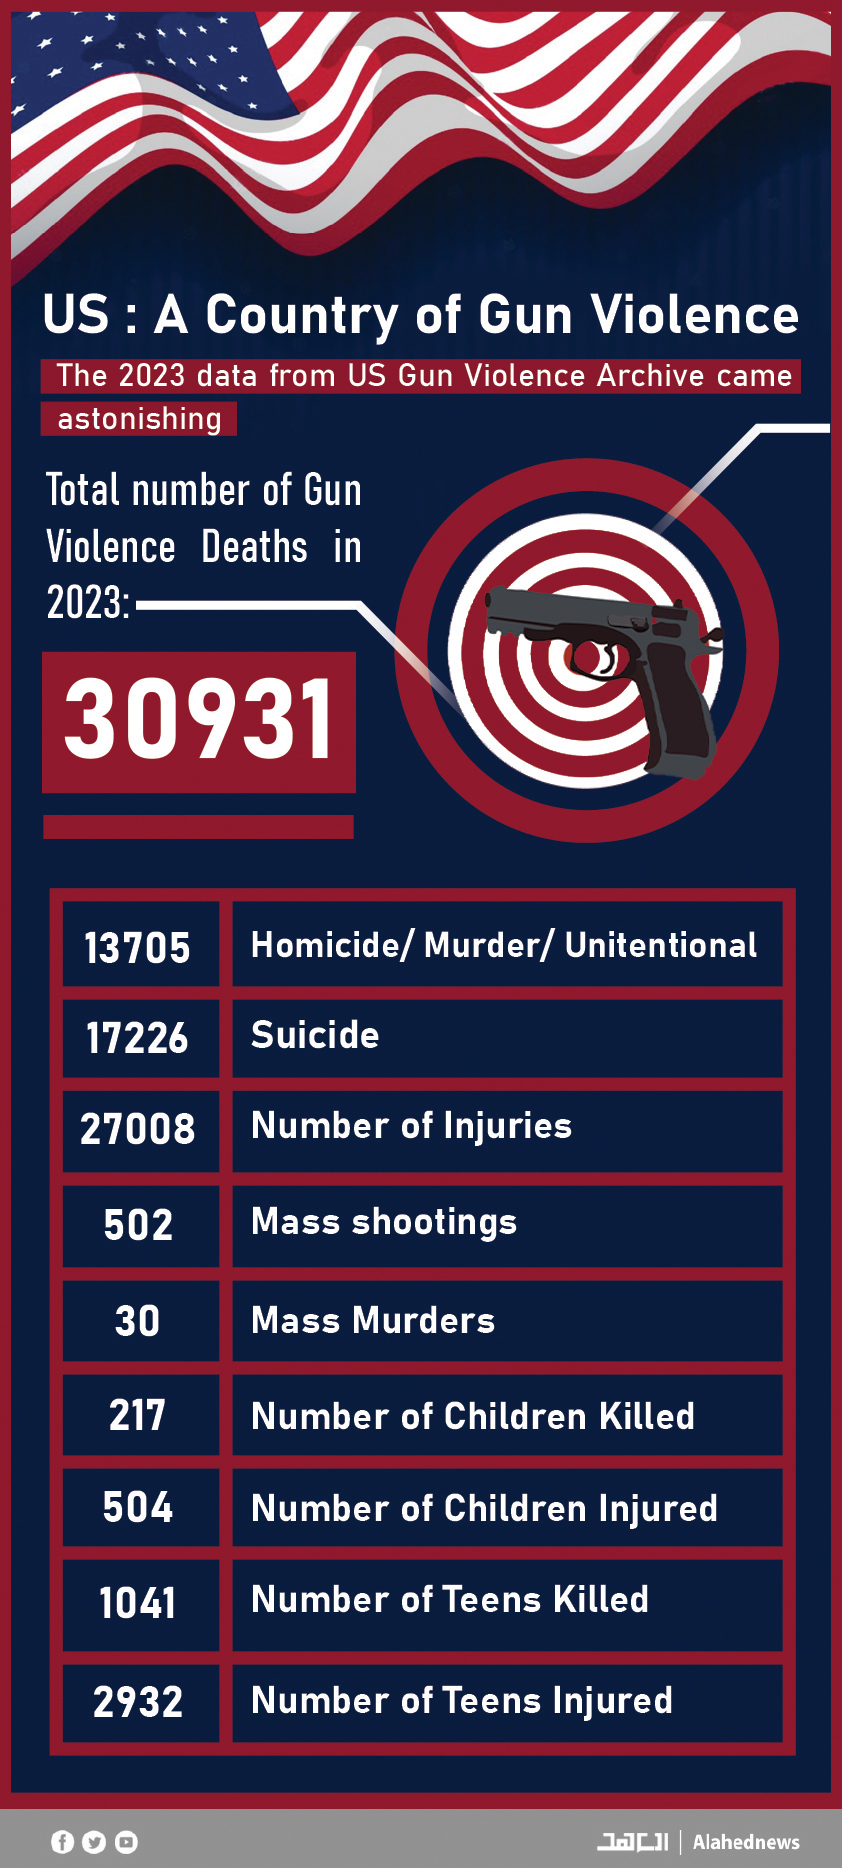 US: Astonishing Numbers in the Country of Gun Violence